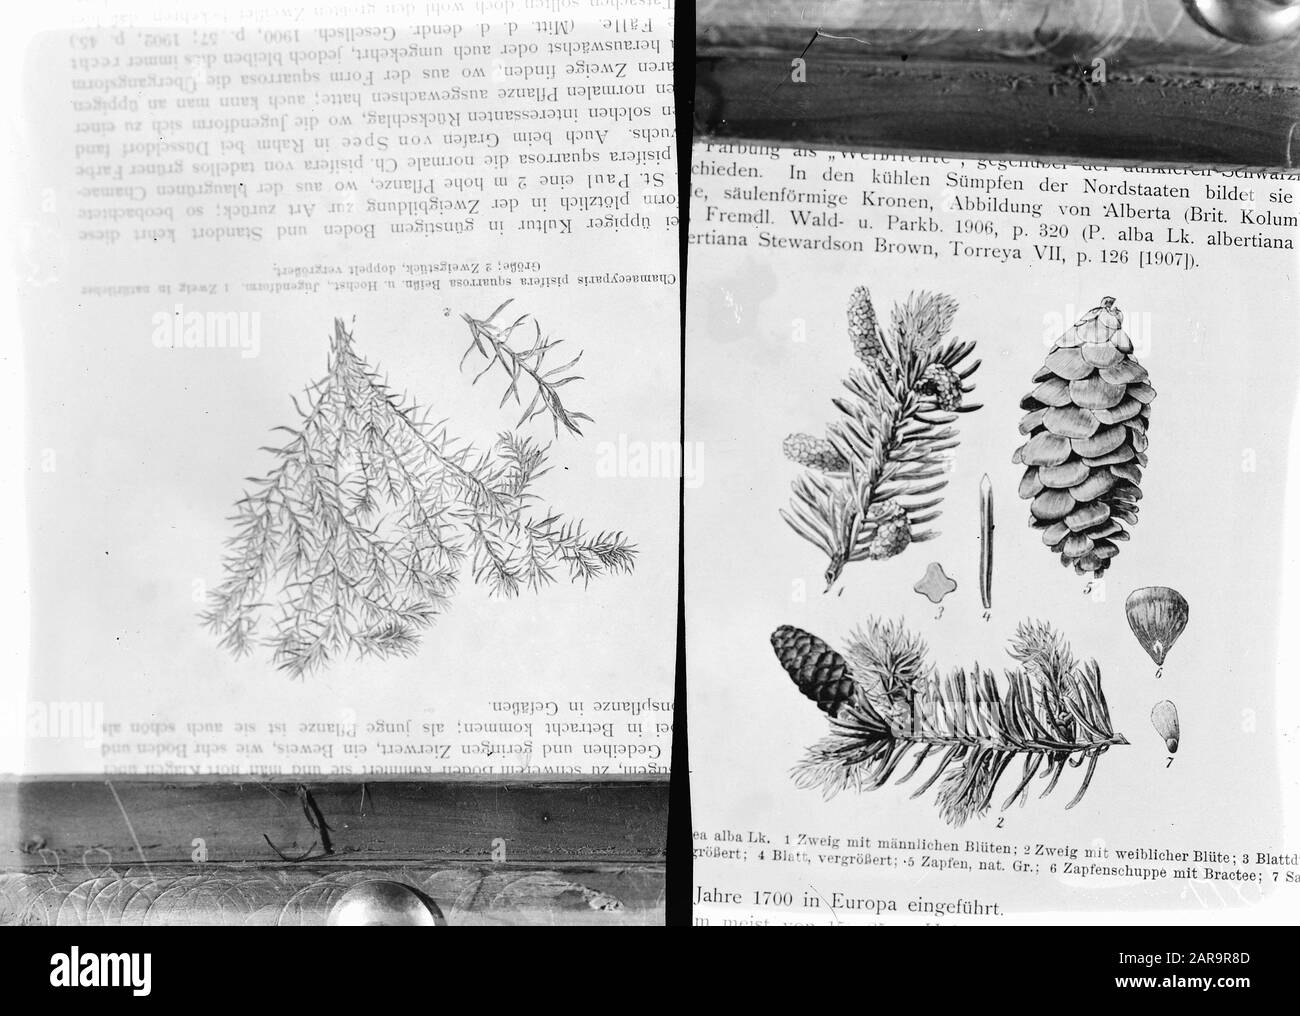 reproductions, softwood, chamaecyparis pisifera squarrosa, picea canadensis Date: undated Keywords: softwood, reproductions Personal name: chamaecyparis pisifera squarrosa, picea canadensis Stock Photo